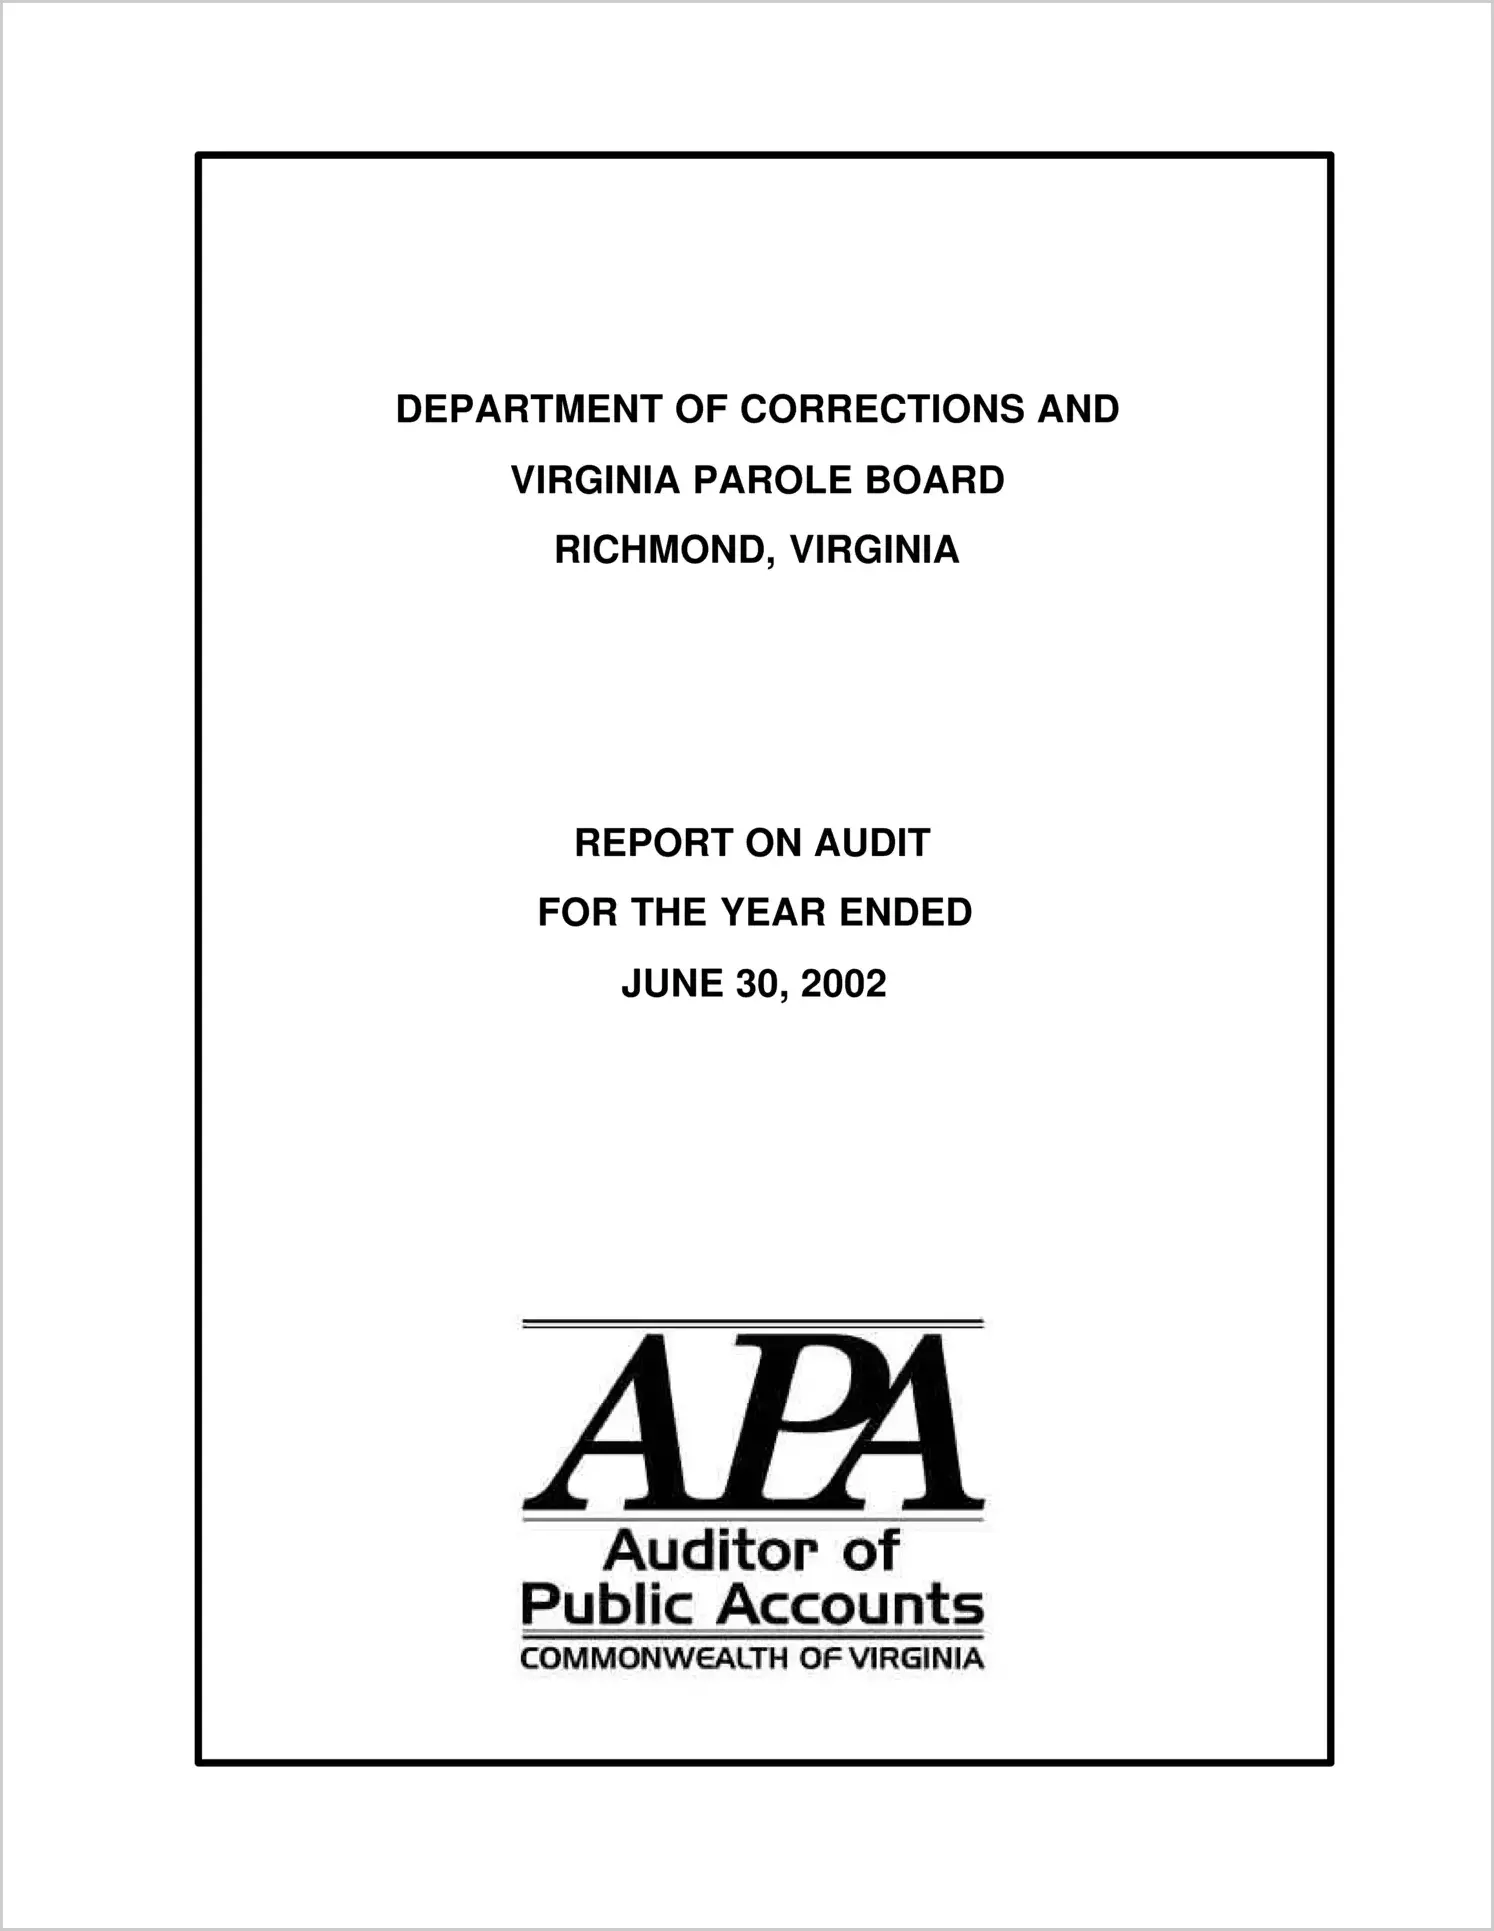 Department of Corrections and Virginia Parole Board for the year ended June 30, 2002